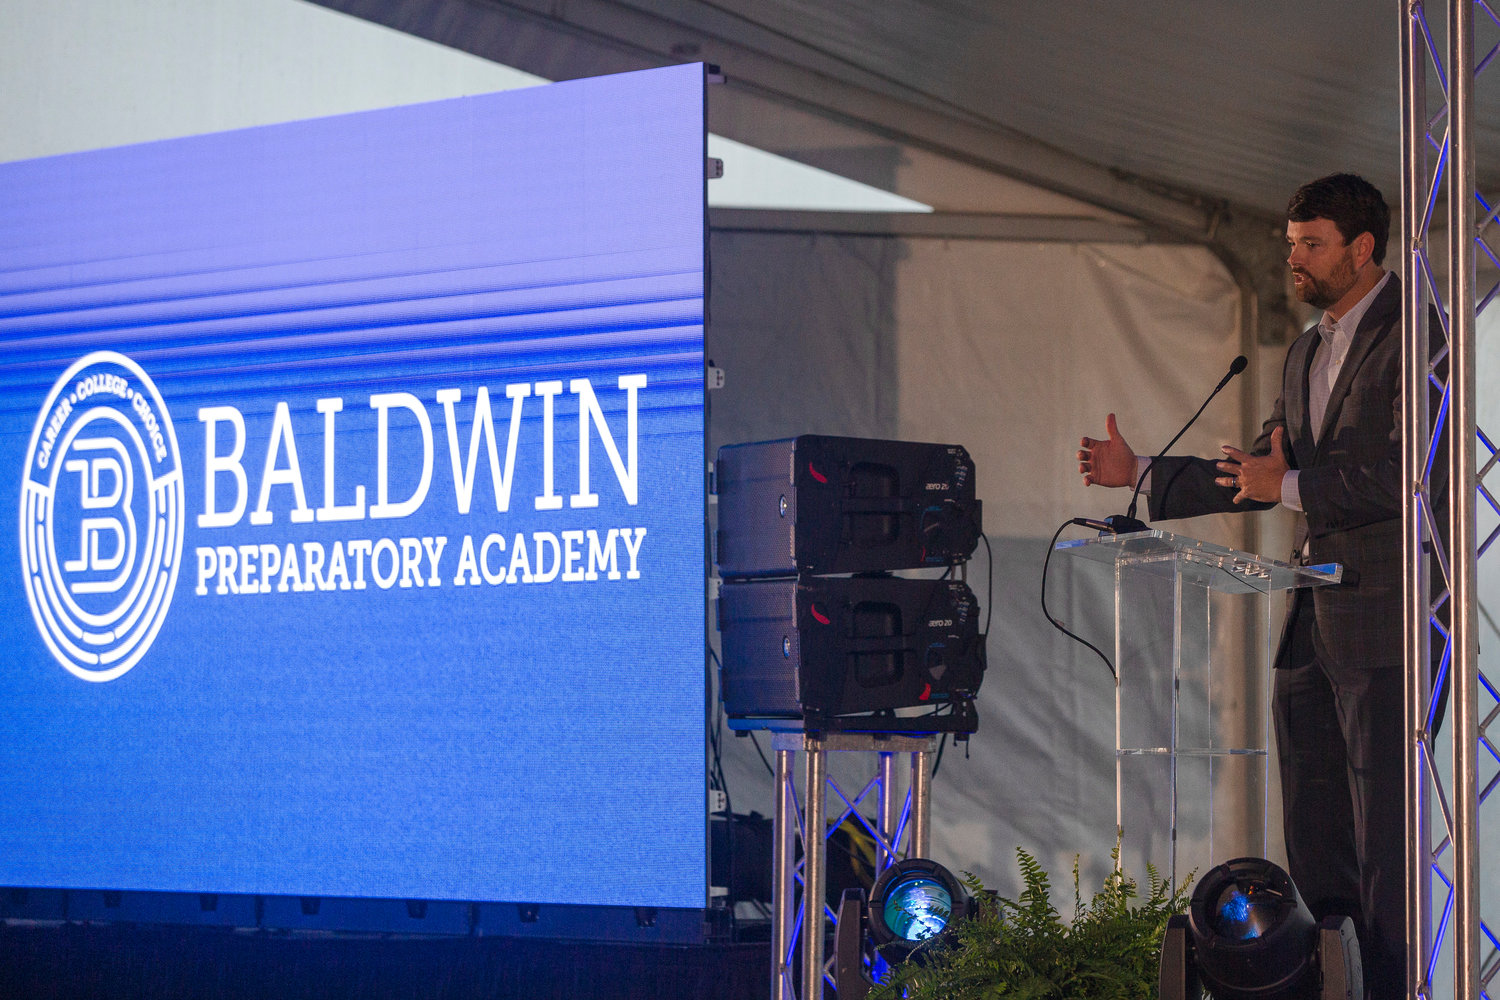 Lee Lawson, President of the Baldwin County Economic Development Alliance, gives opening remarks at the Baldwin Prep Academy groundbreaking.